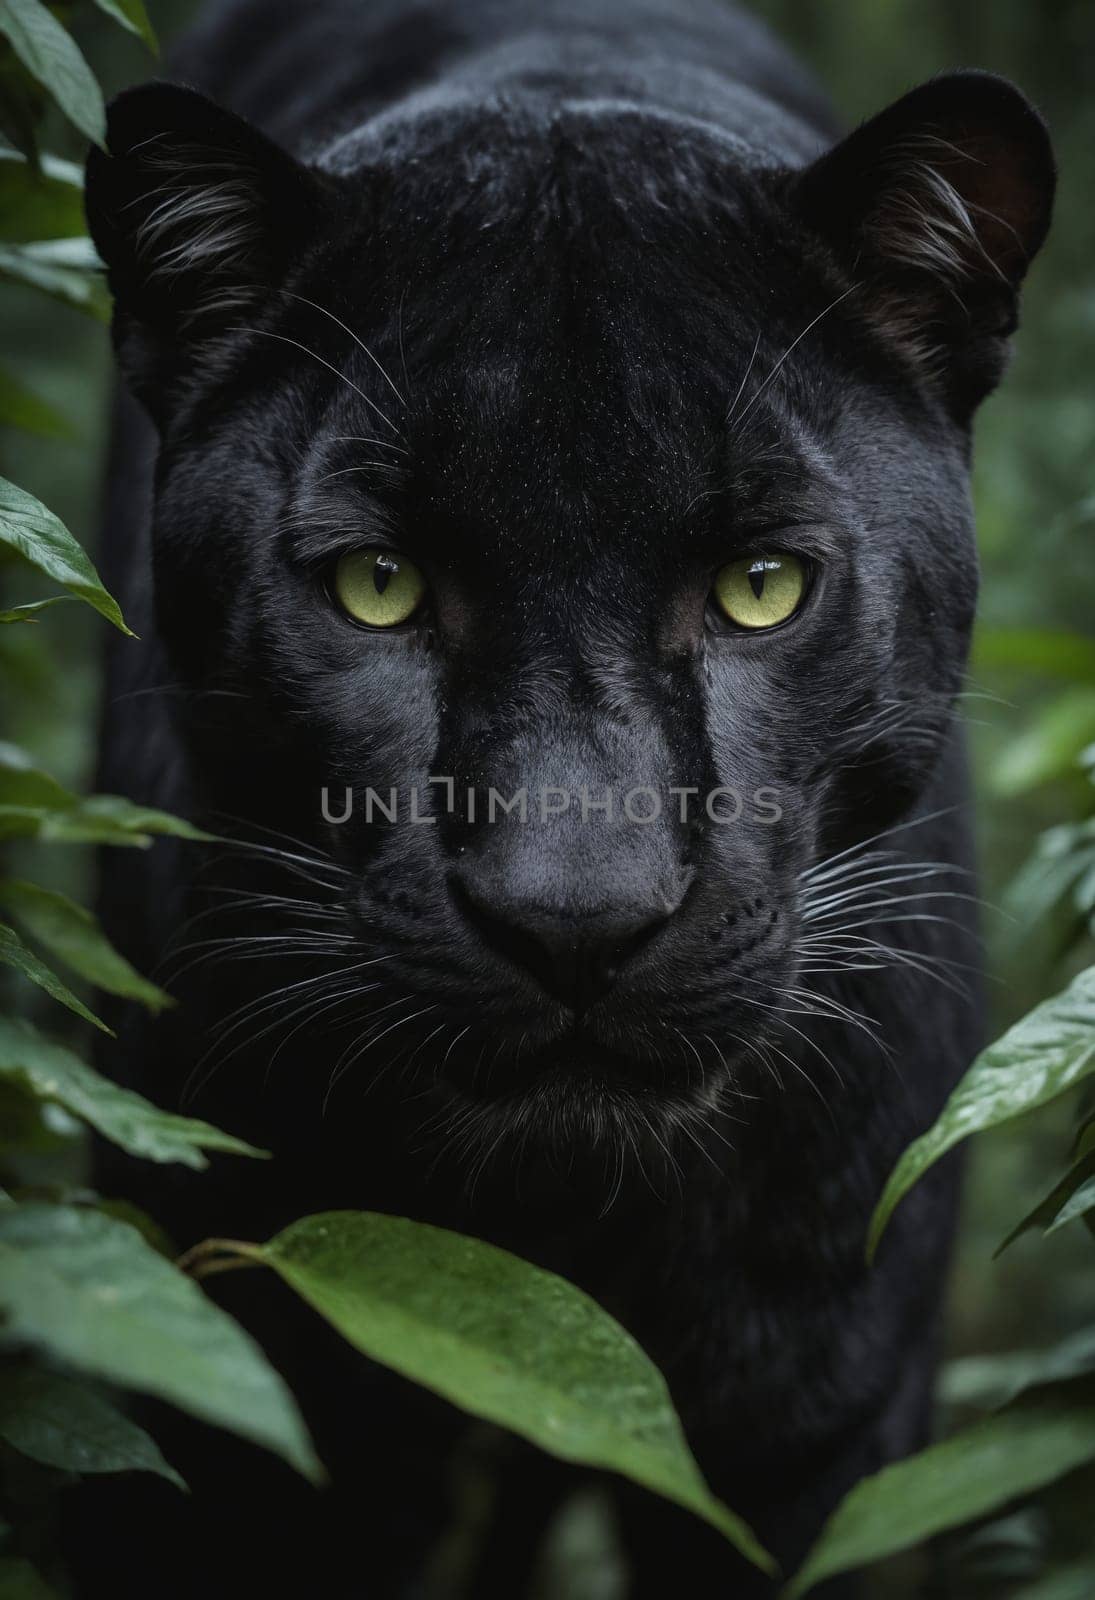 A Felidae carnivore, the black panther, is a terrestrial animal with whiskers and a snout. This cat, known for its stealth, is standing in the jungle, eyeing the camera amidst the grass